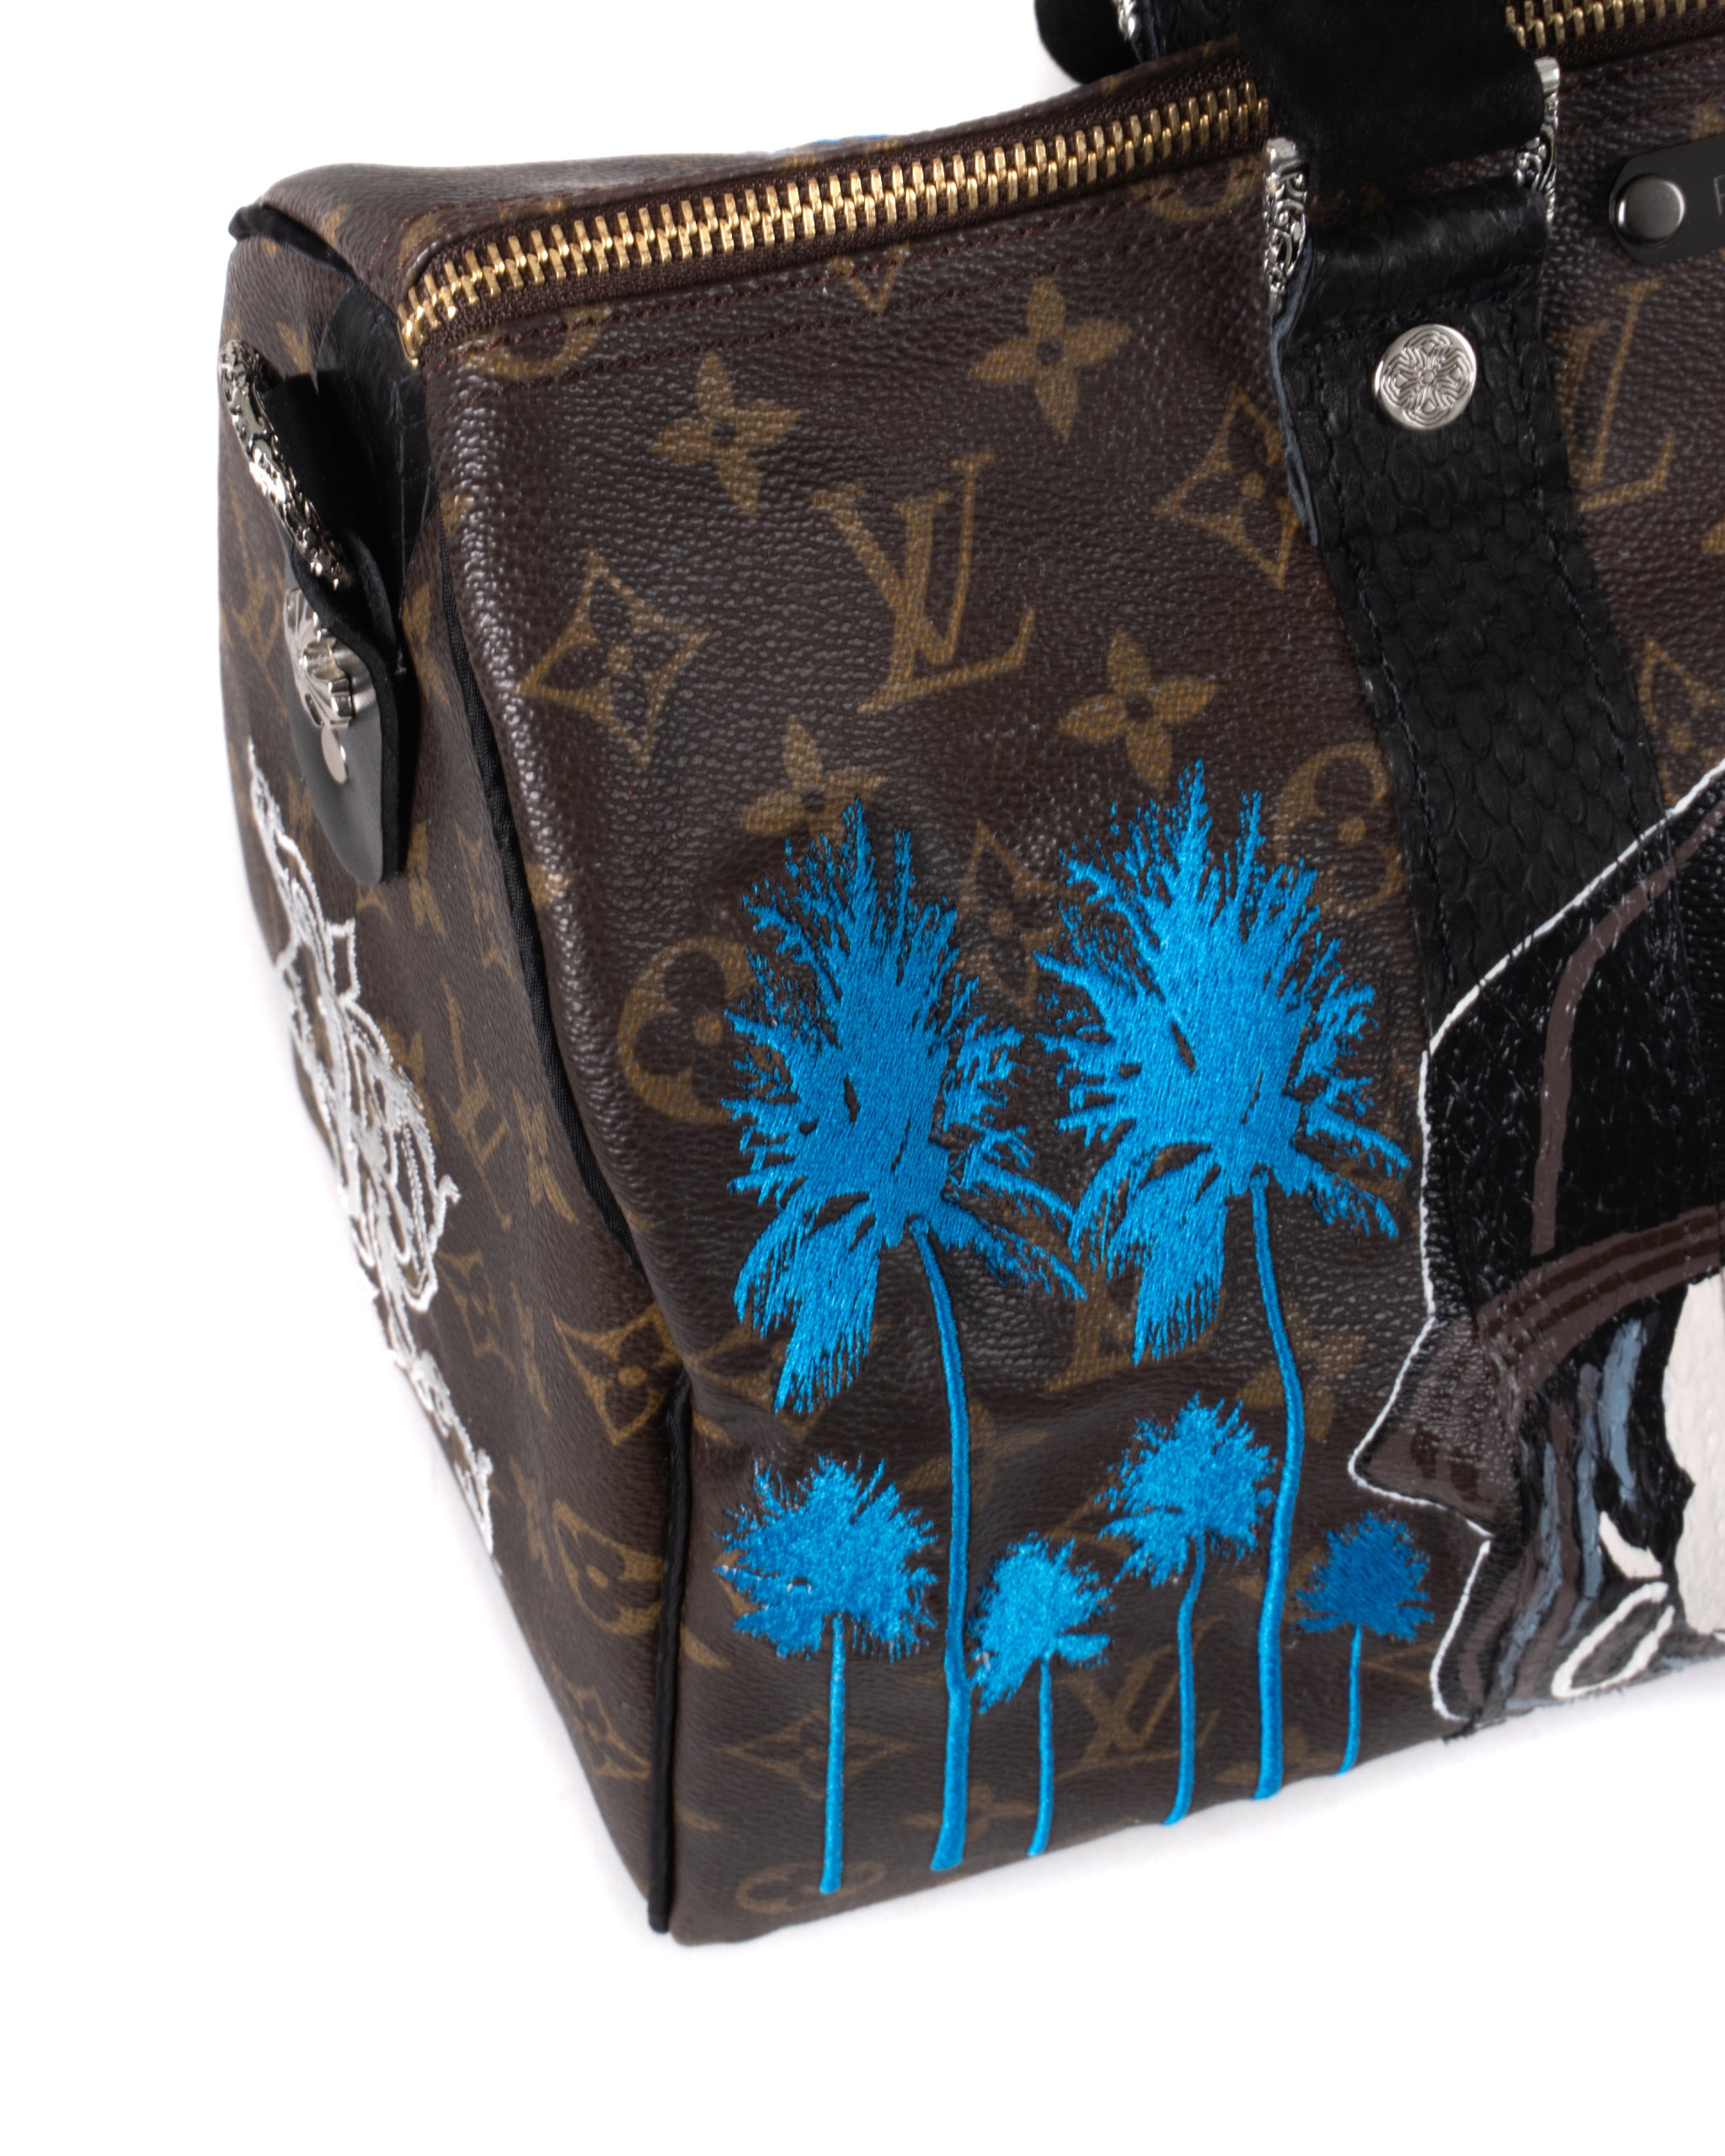 Tiger + keep the best forget the rest of Philip Karto - Customized Louis  Vuitton bag 35cm for women